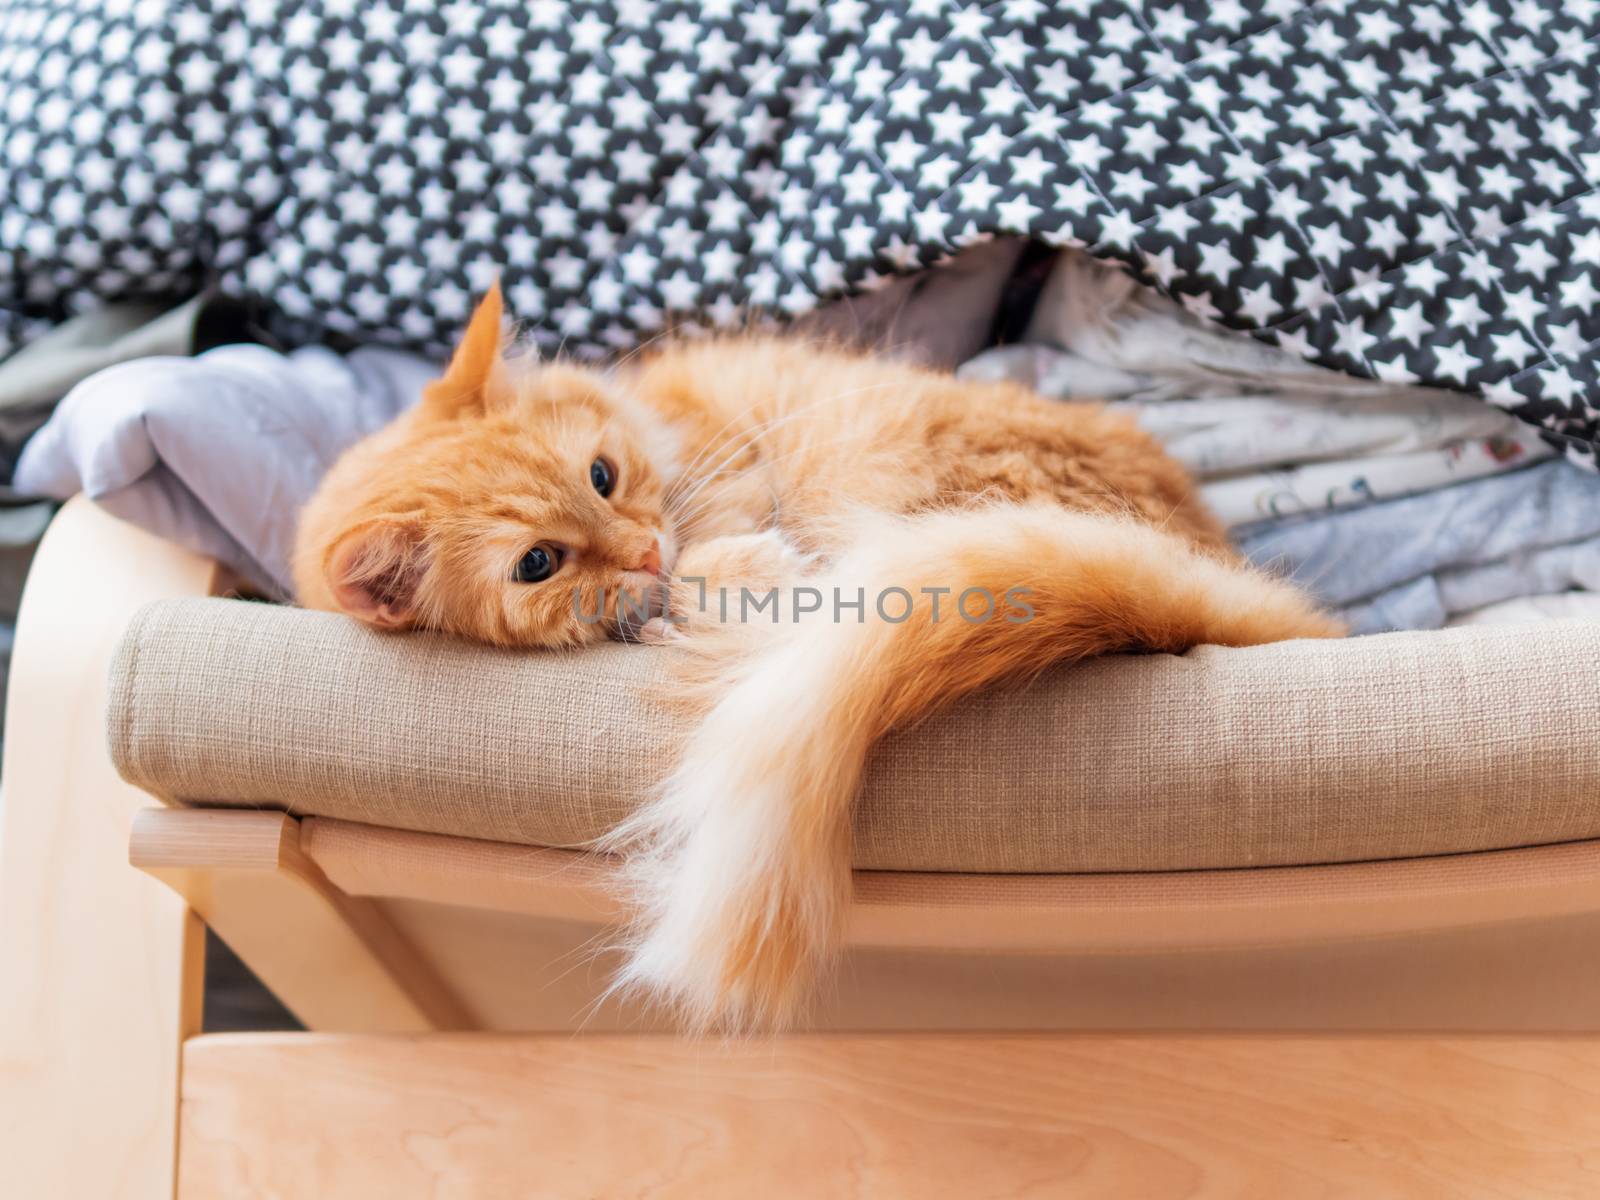 Cute ginger cat is lying on beige chair. Pile of crumpled clothes behind fluffy pet.